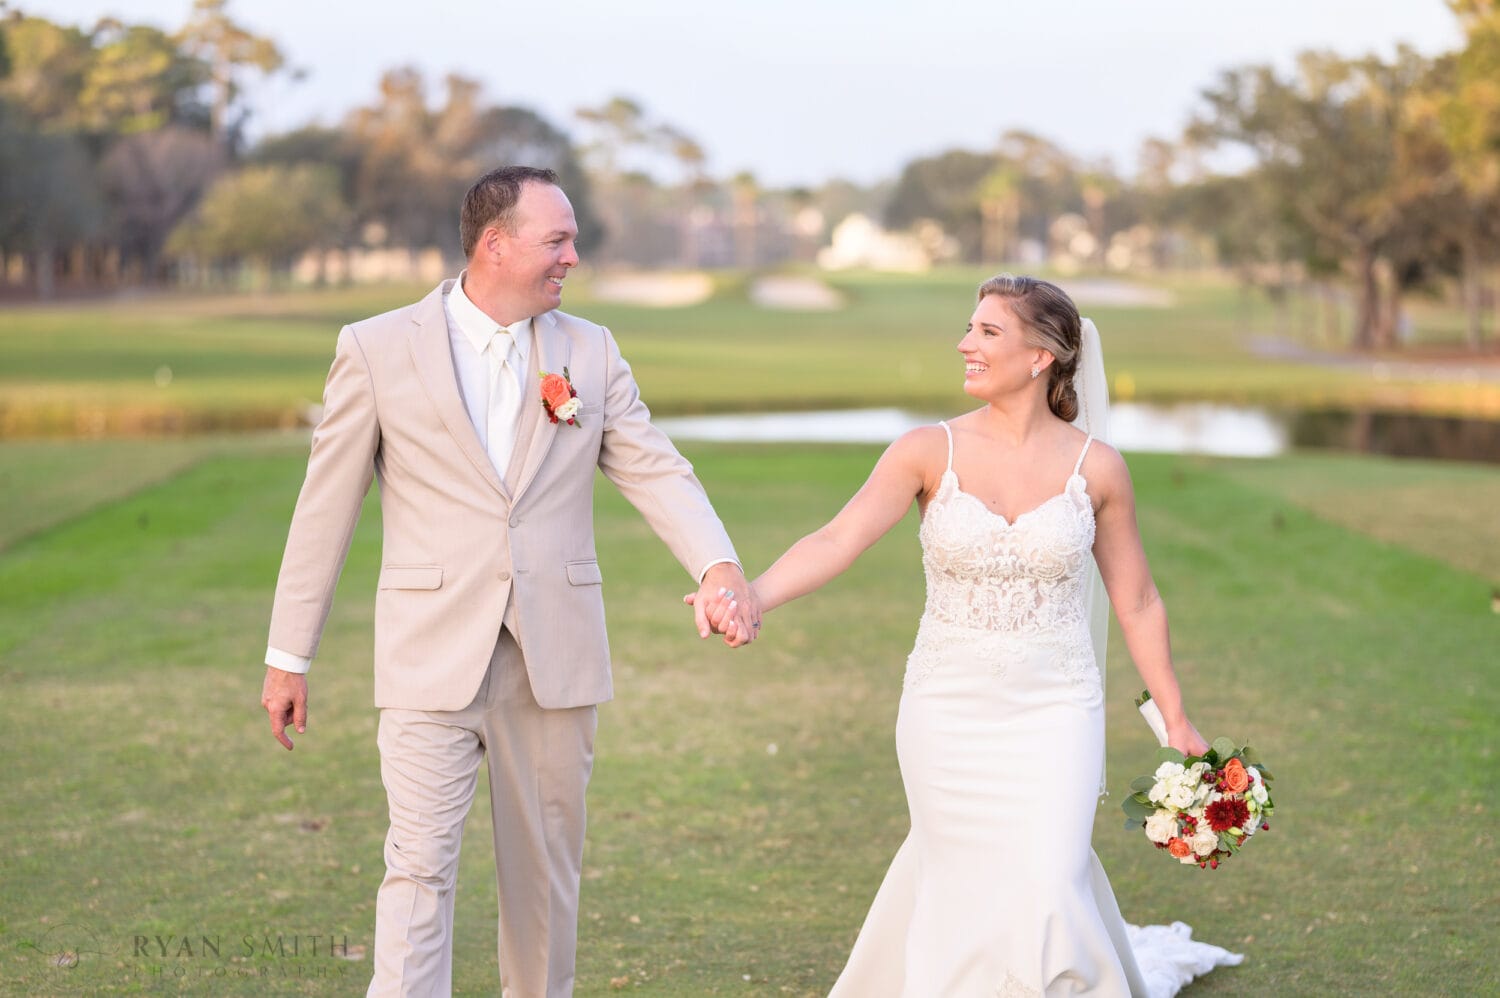 Holding hands smiling at each other - Dunes Golf & Beach Club